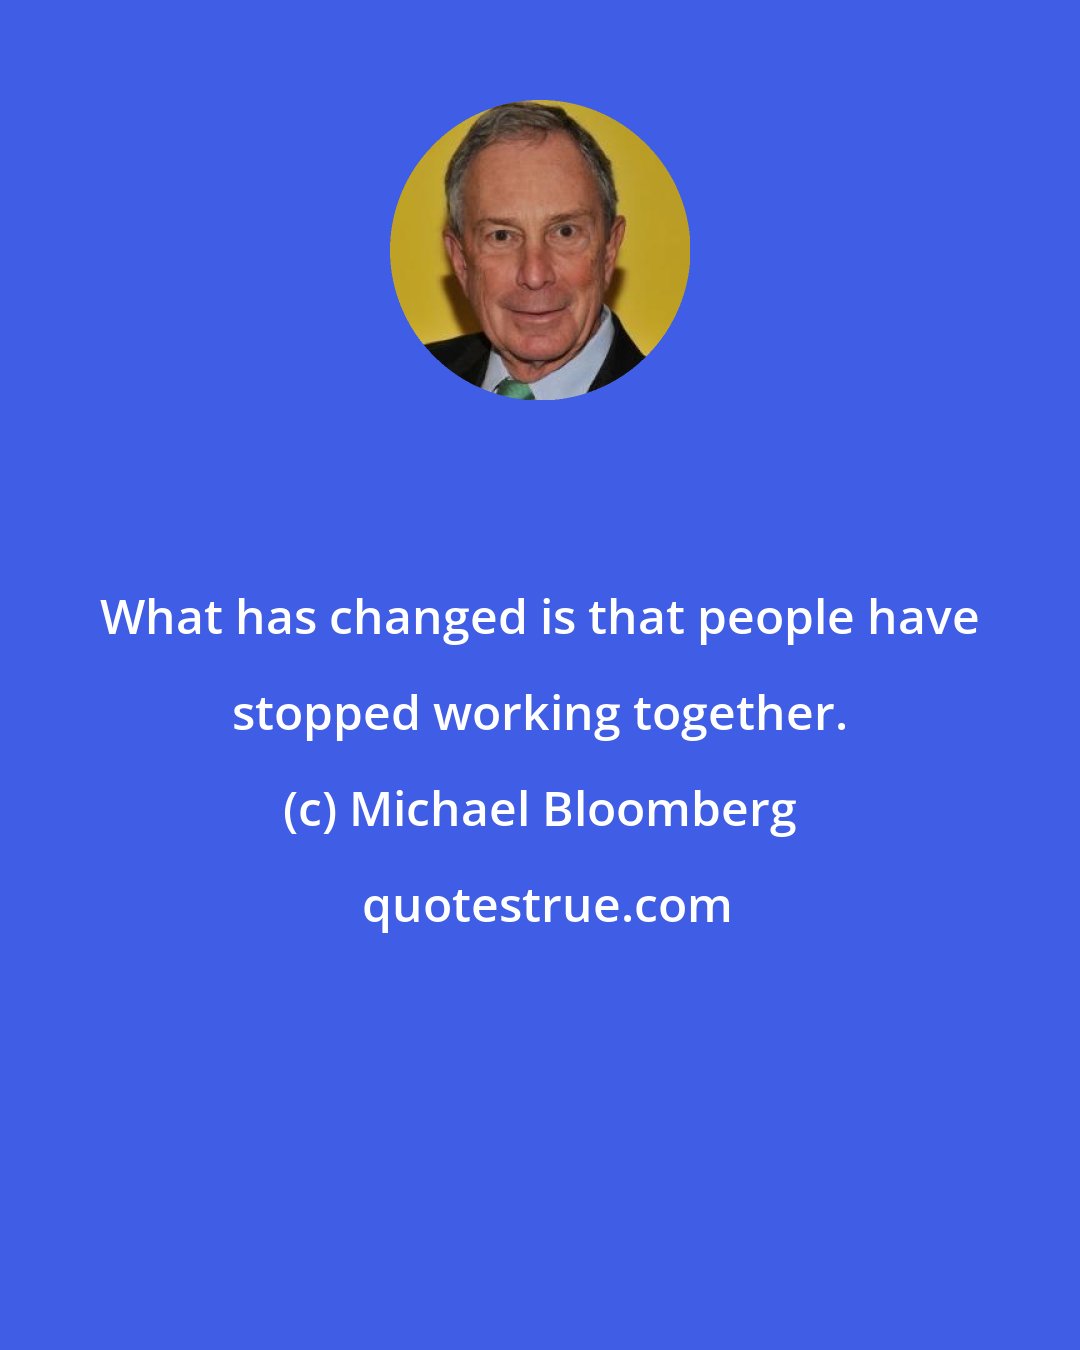 Michael Bloomberg: What has changed is that people have stopped working together.